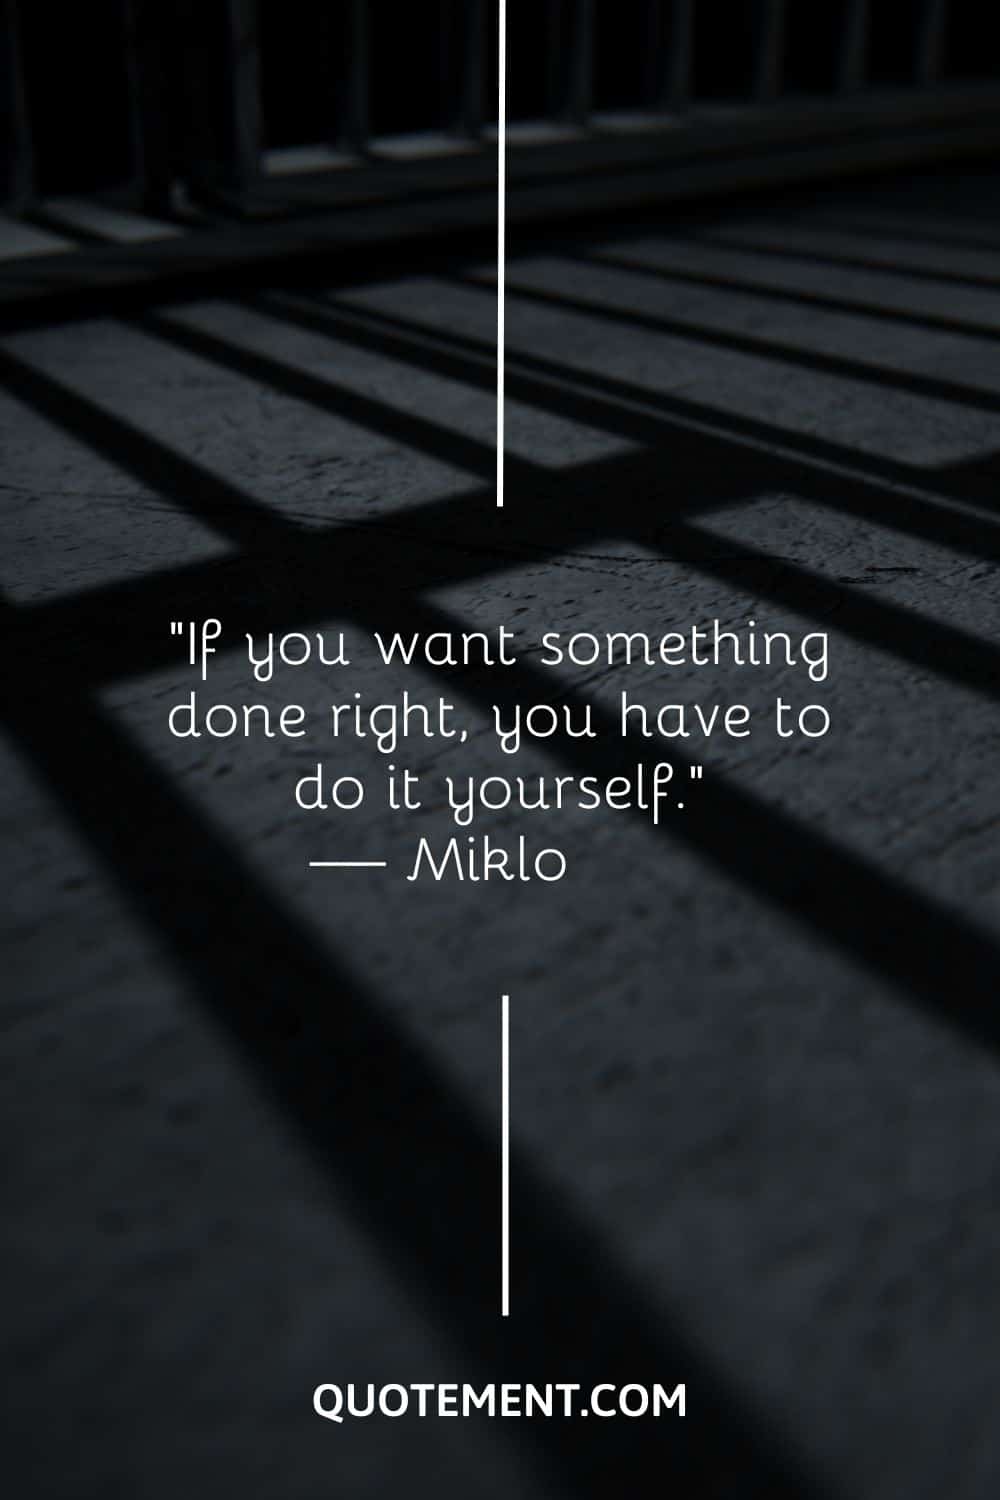 If you want something done right, you have to do it yourself